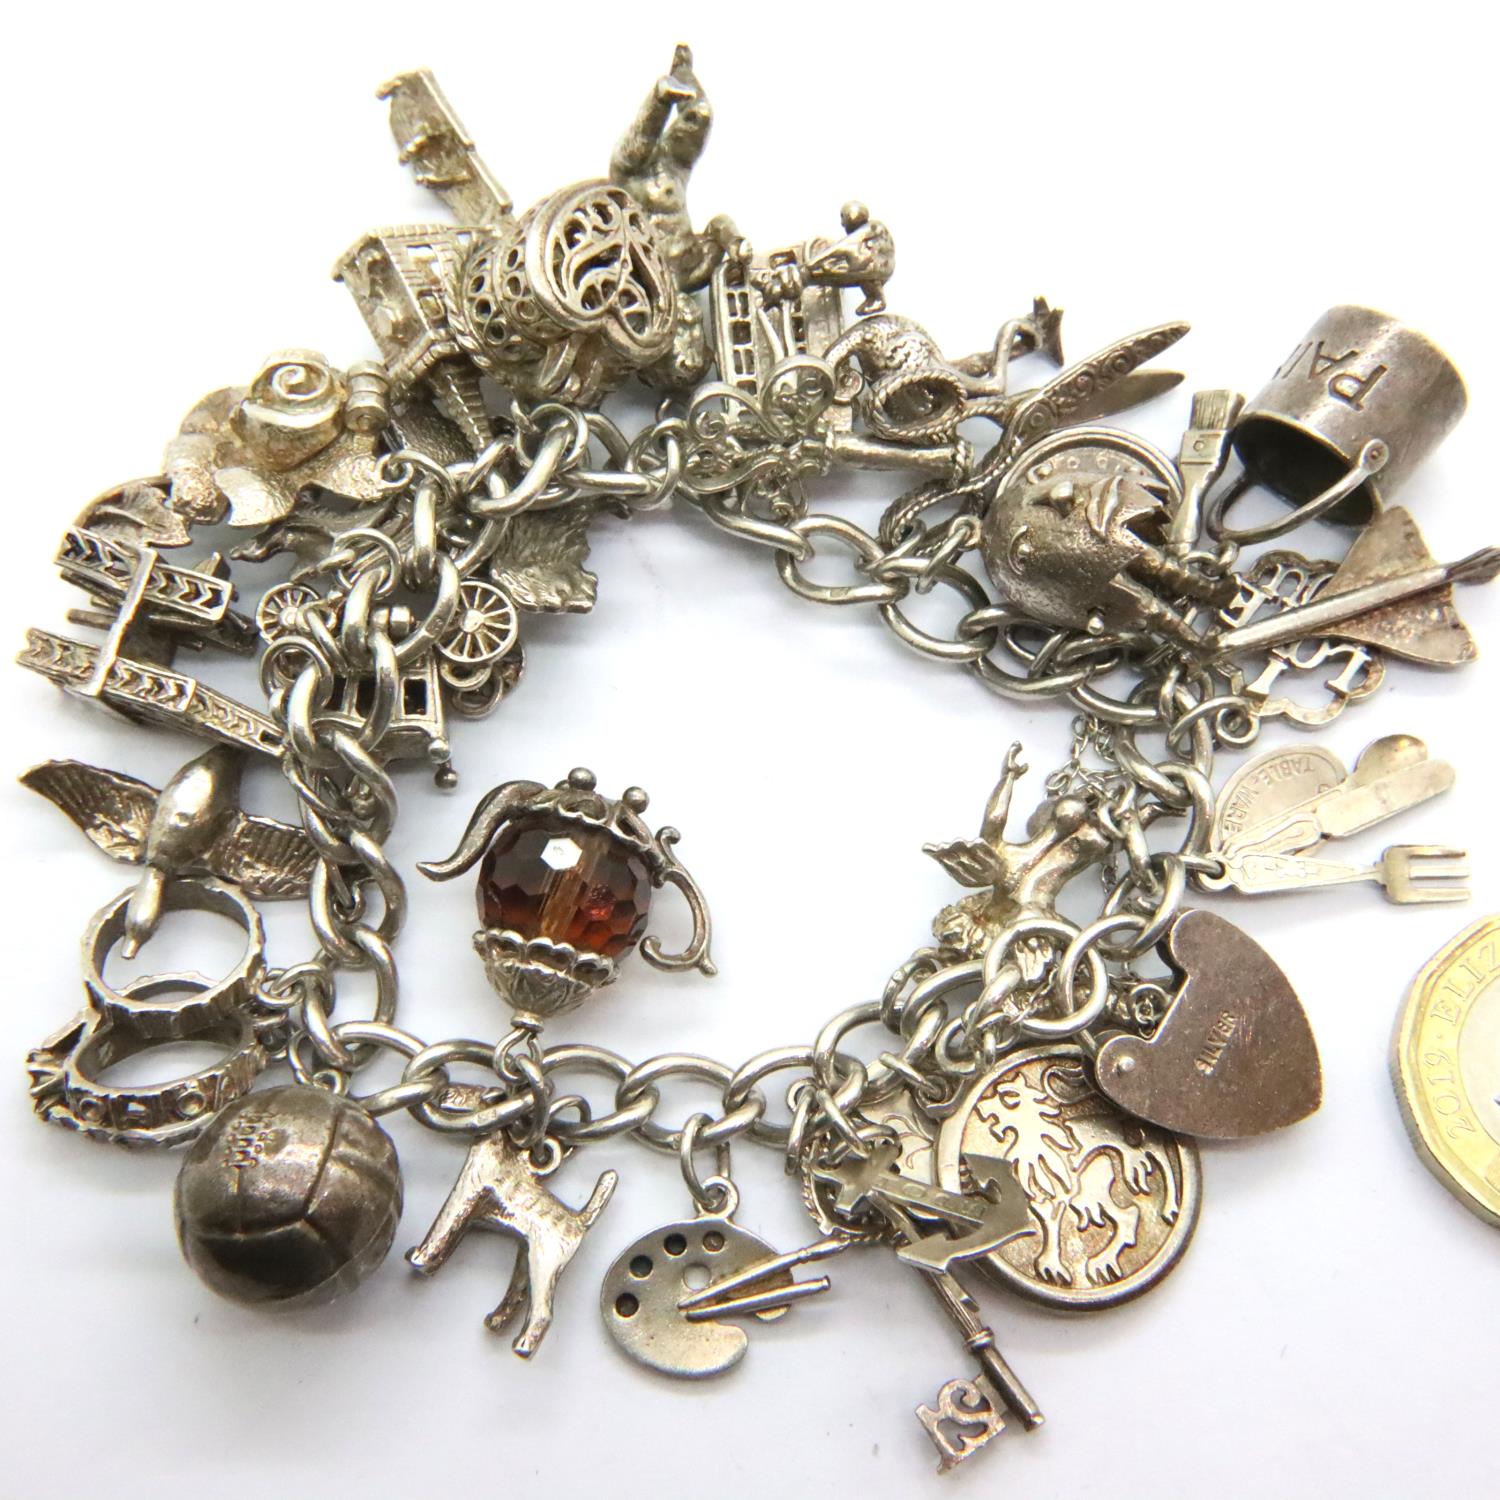 925 silver charm bracelet with padlock clasp and 29 charms, combined 91g. P&P Group 1 (£14+VAT for